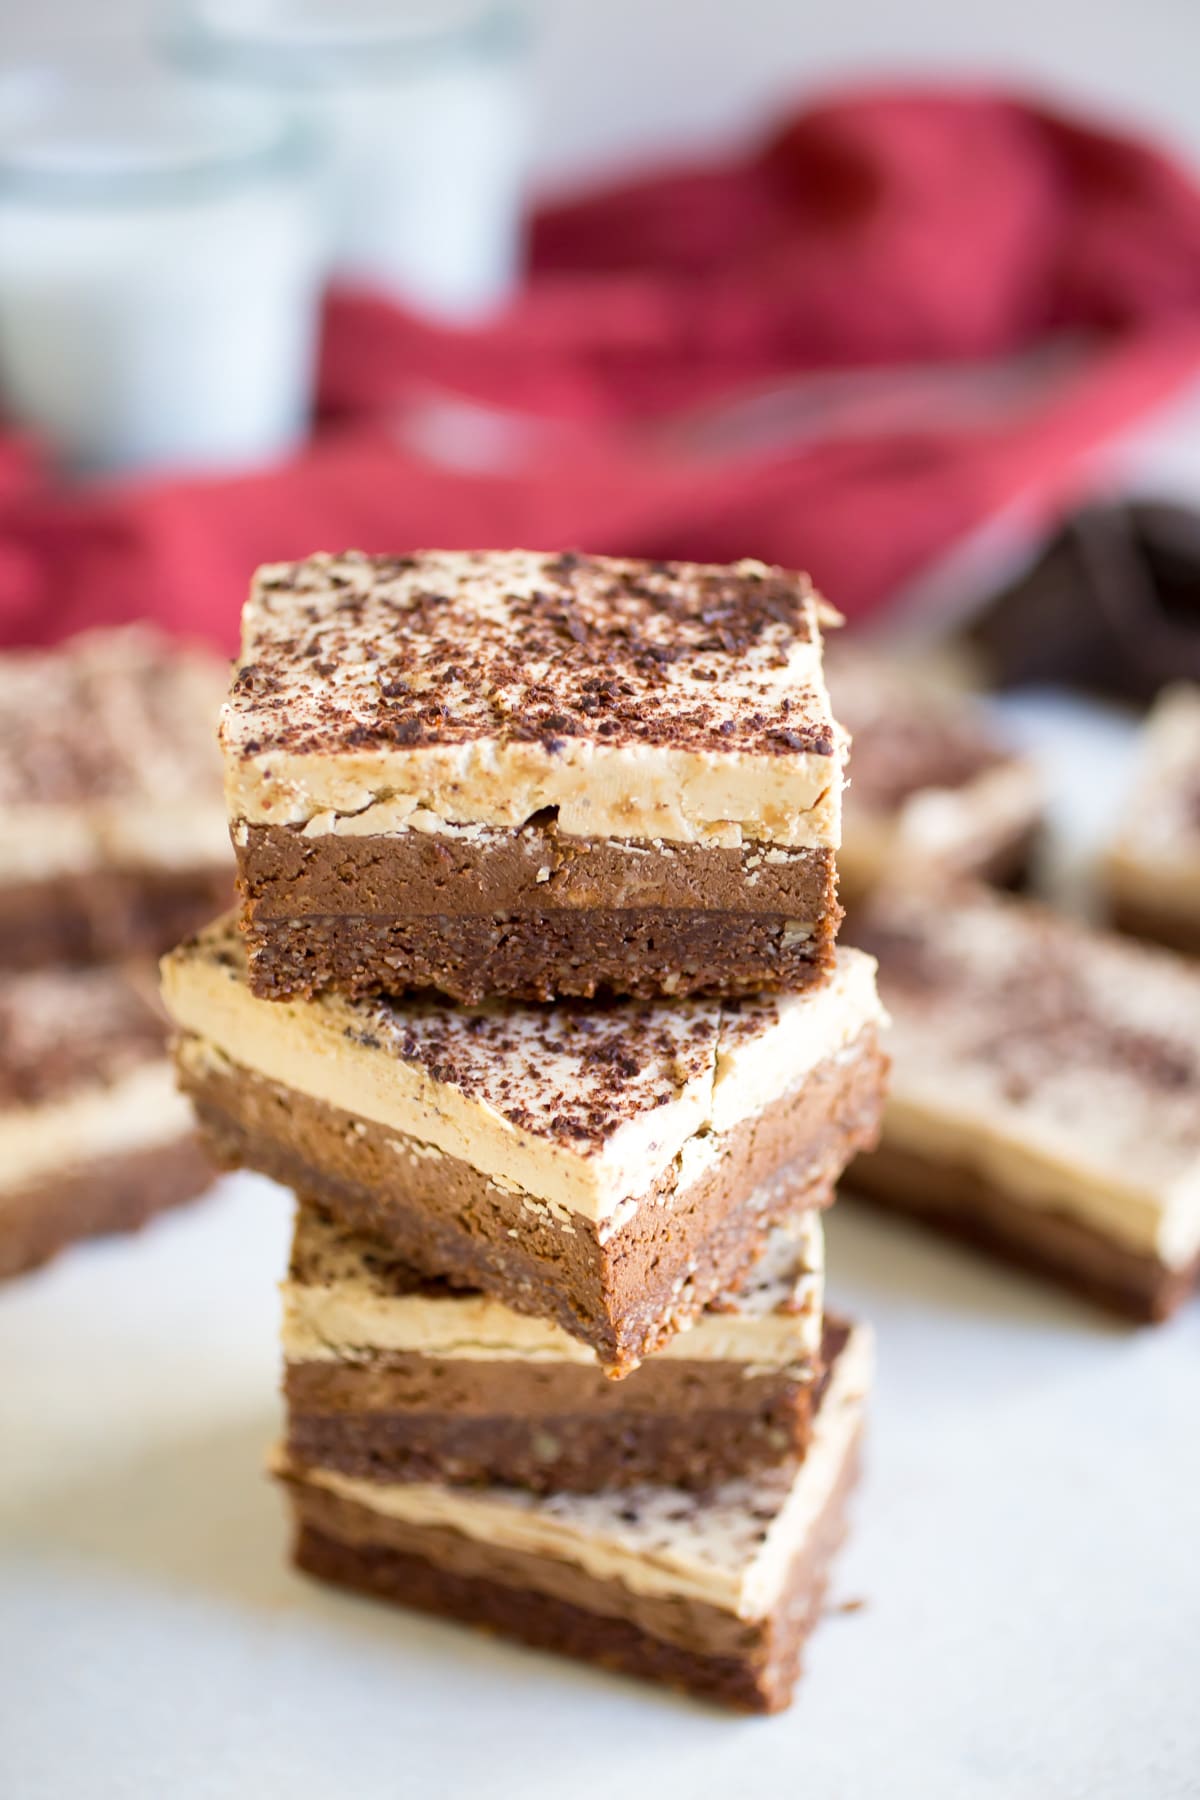 These Paleo Triple Chocolate Layer Bars have a chocolate pecan crust with a chocolate mousse layer and a buttercream topping! You're going to love this irresistible dessert.